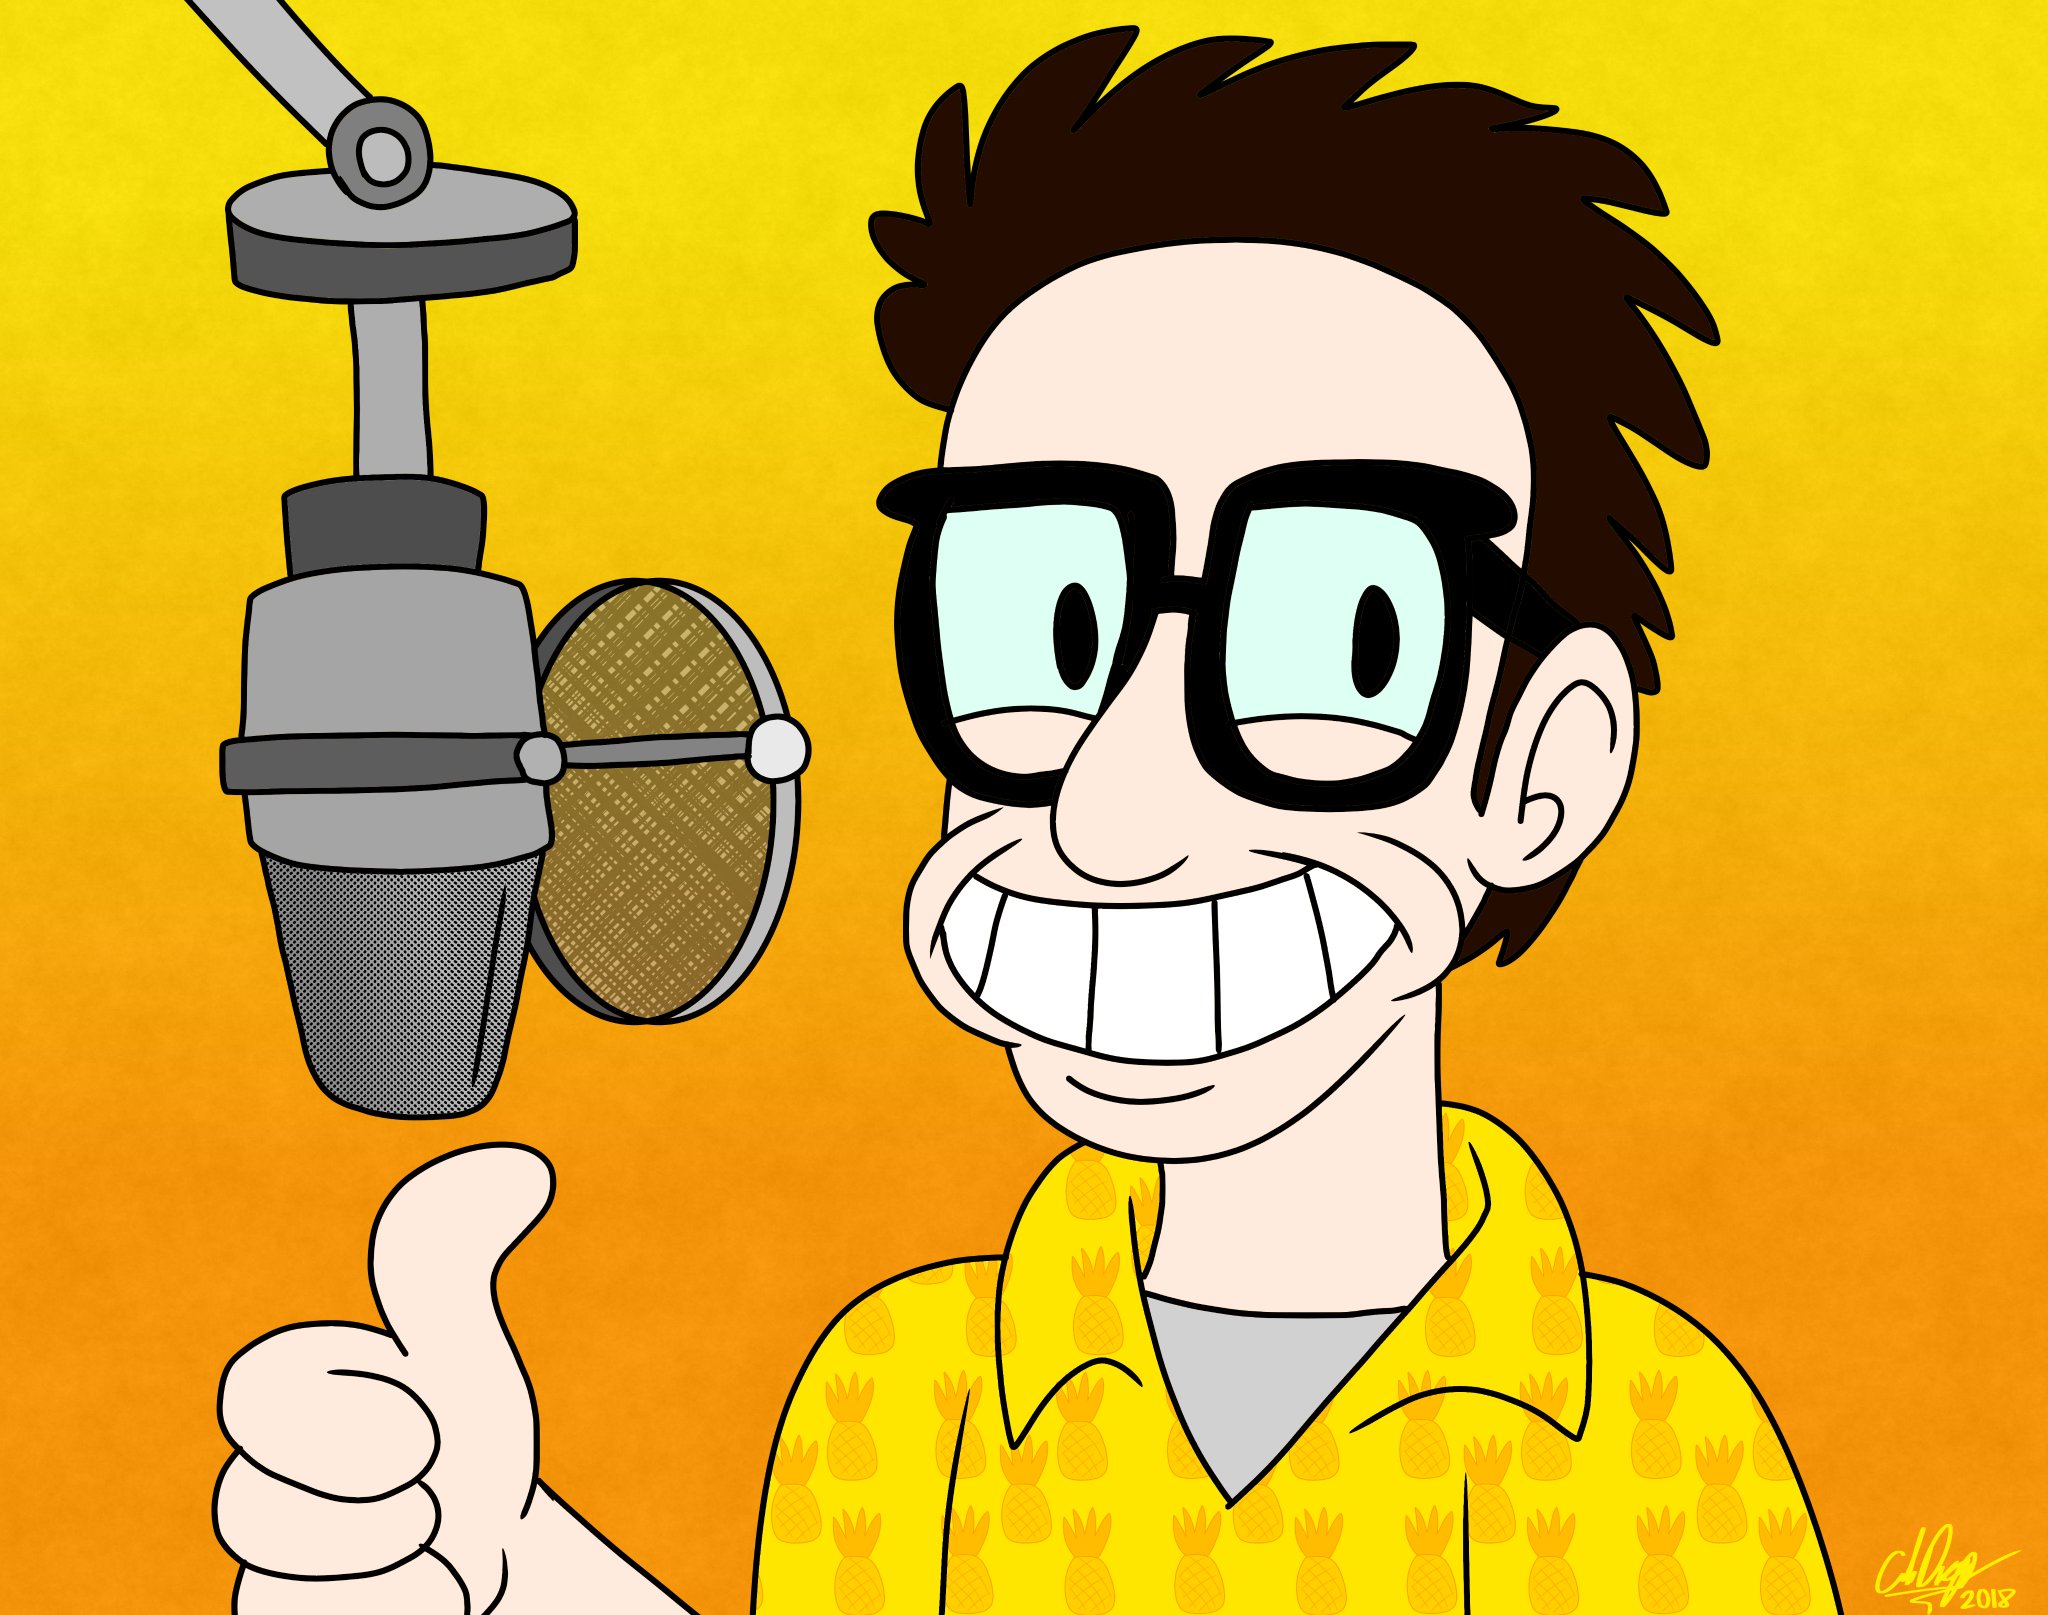 Happy Birthday to One of my favorite voice actors! (Tom Kenny) 